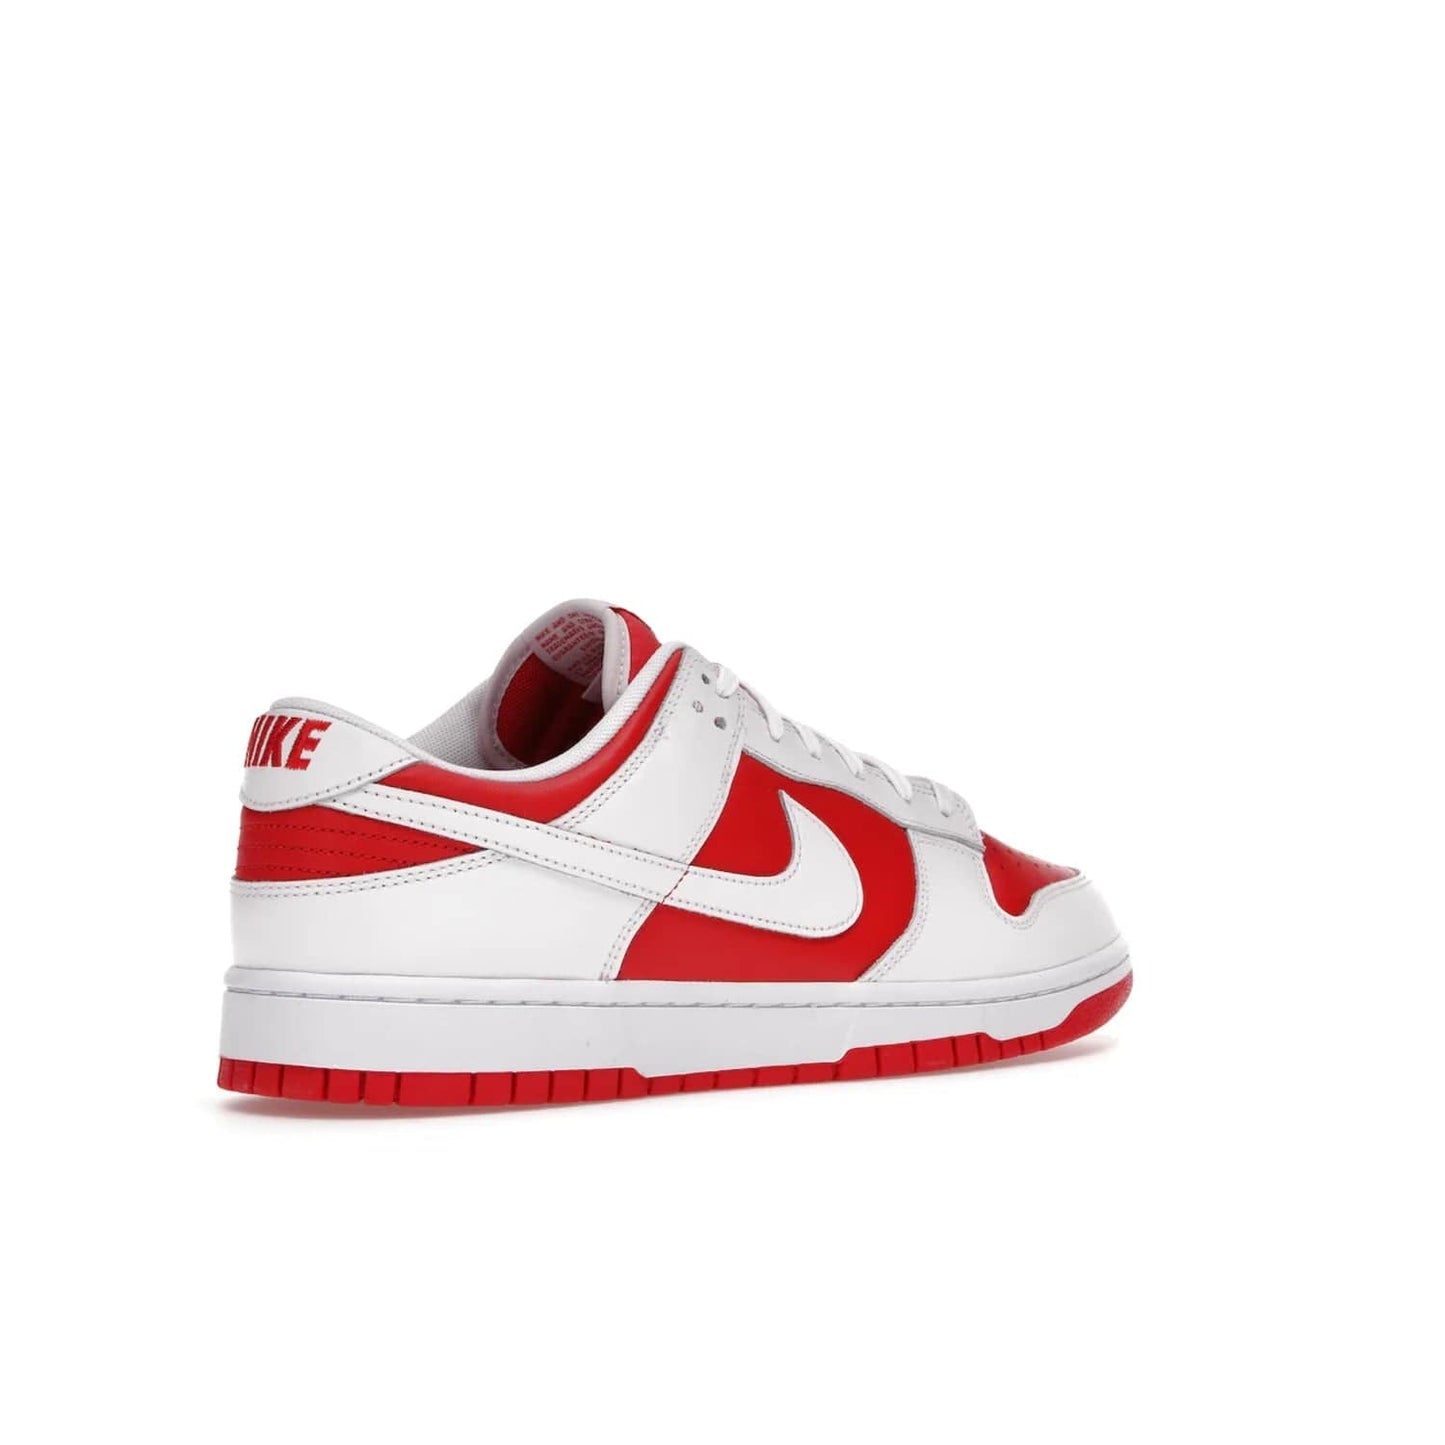 Nike Dunk Low Championship Red (2021) - Image 33 - Only at www.BallersClubKickz.com - A bold and stylish Nike Dunk Low Championship Red from 2021 with a classic retro design. University Red upper, white leather overlays and Swooshes, and a woven tongue label. Make a statement with these sleek kicks!